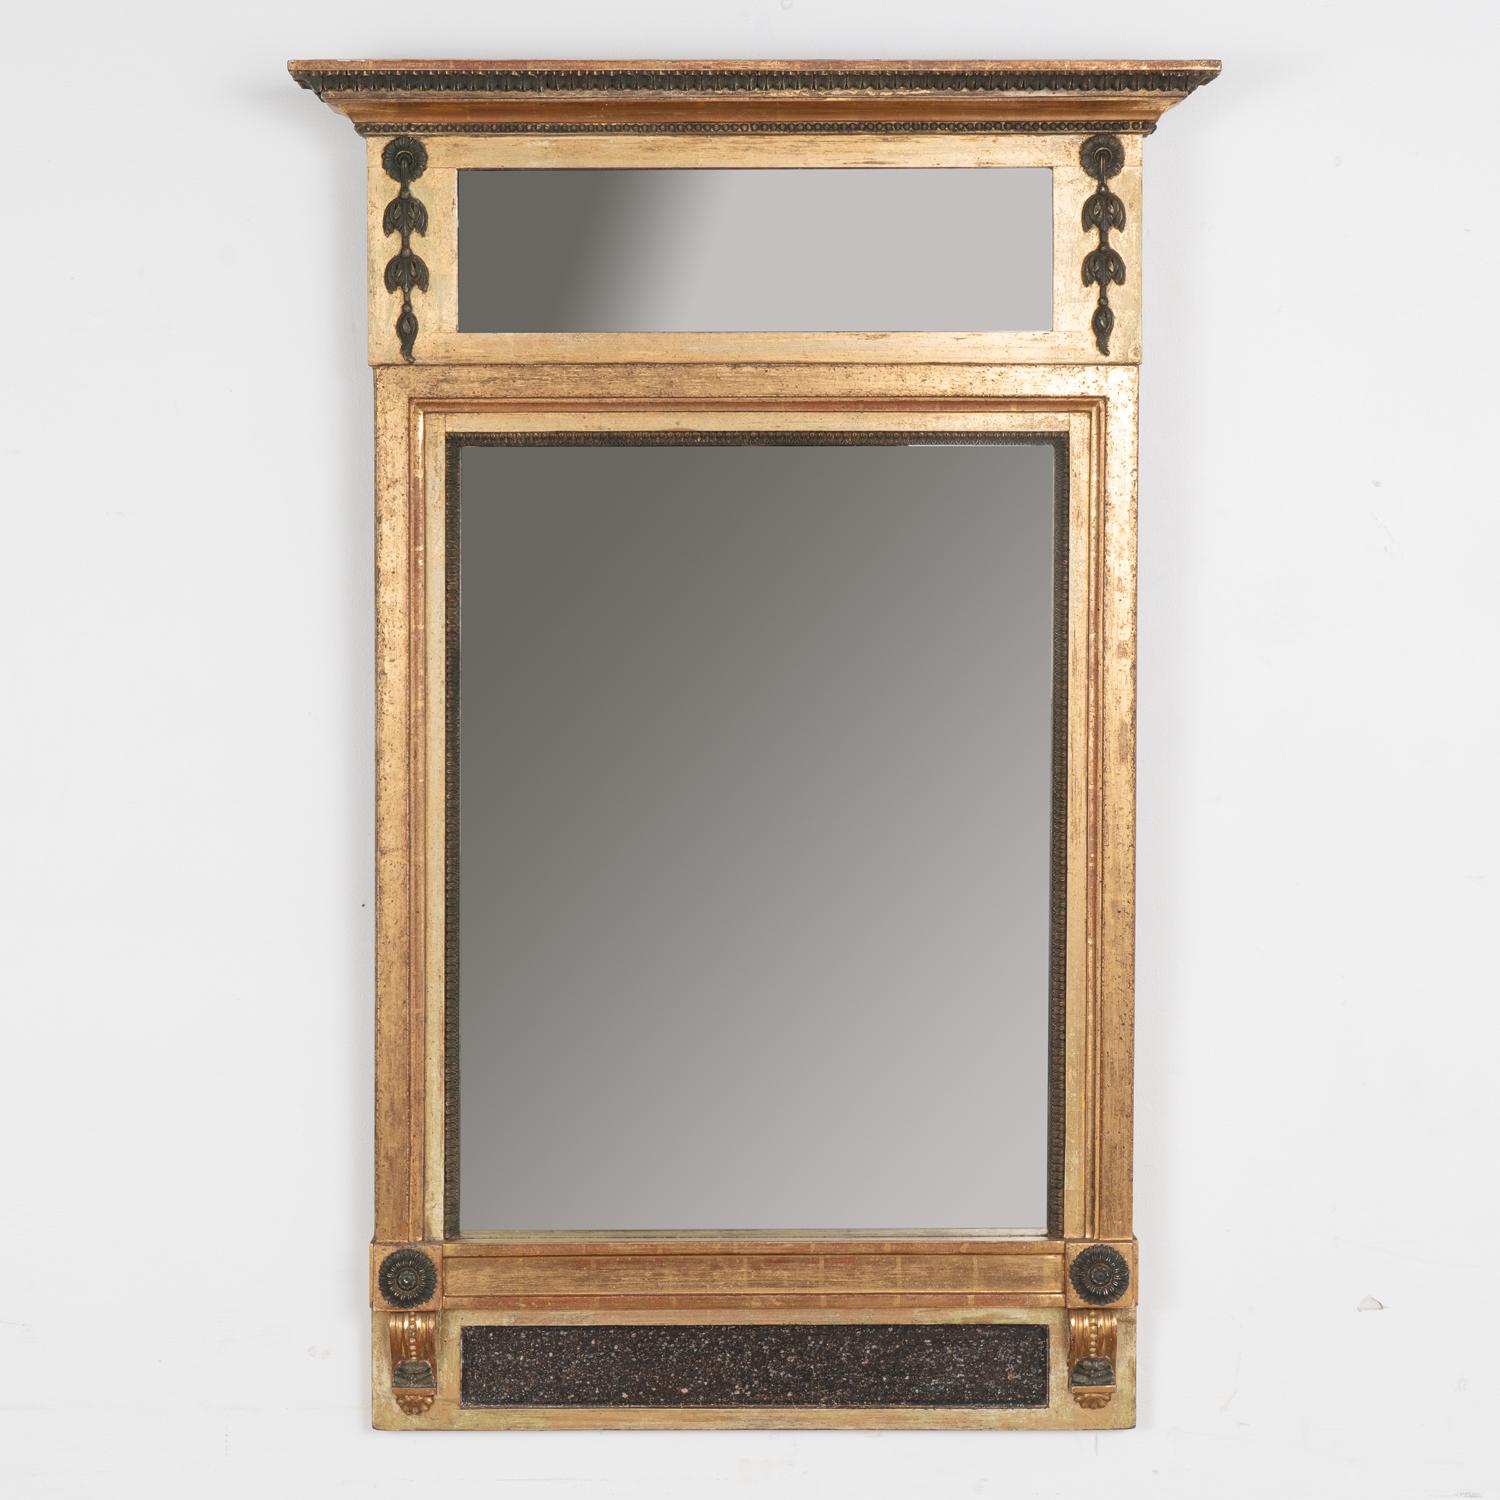 Lovely trumeau mirror with applied carved swags, flower medallions, and beaded trim. At 4' tall, it will provide a striking decorative presence. 
Restored, the gold and bronze gilt is accented with soft burnished red undertones and dramatic black